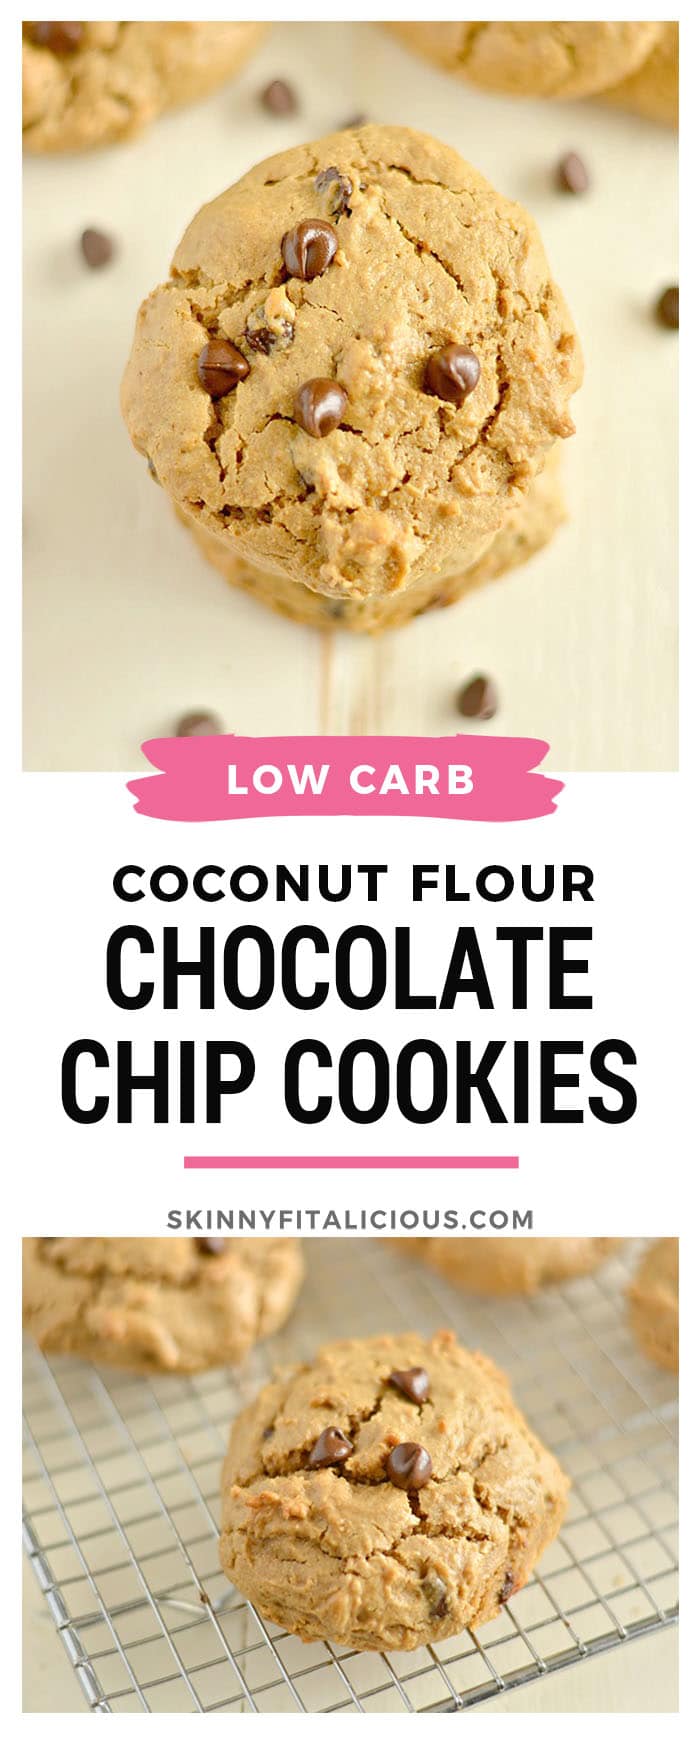 OMG Good Low Carb Chocolate Chip Cookies! Creamy, insanely buttery, thick, rich cookies bursting with rich chocolatey goodness! Hearty low carb cookies so good you may have to hide them. Gluten Free + Low Calorie + Paleo